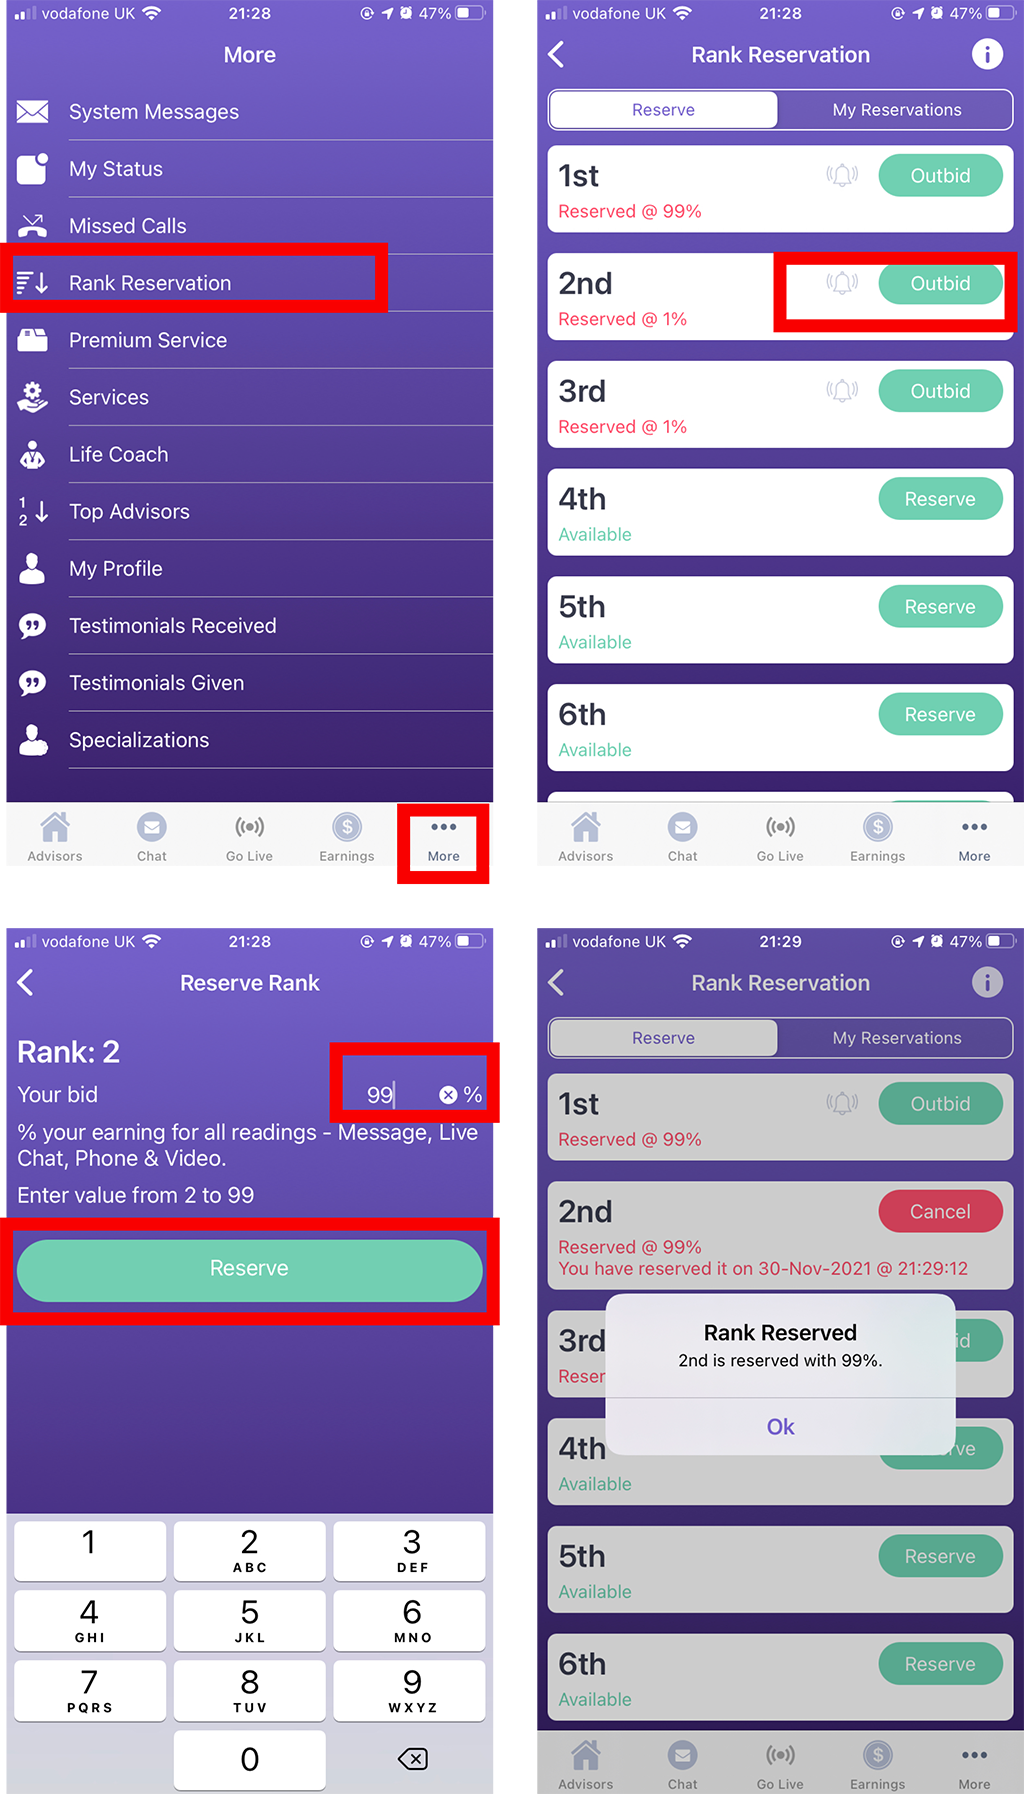 How To Reserve Rank On Live Psychic Chat App